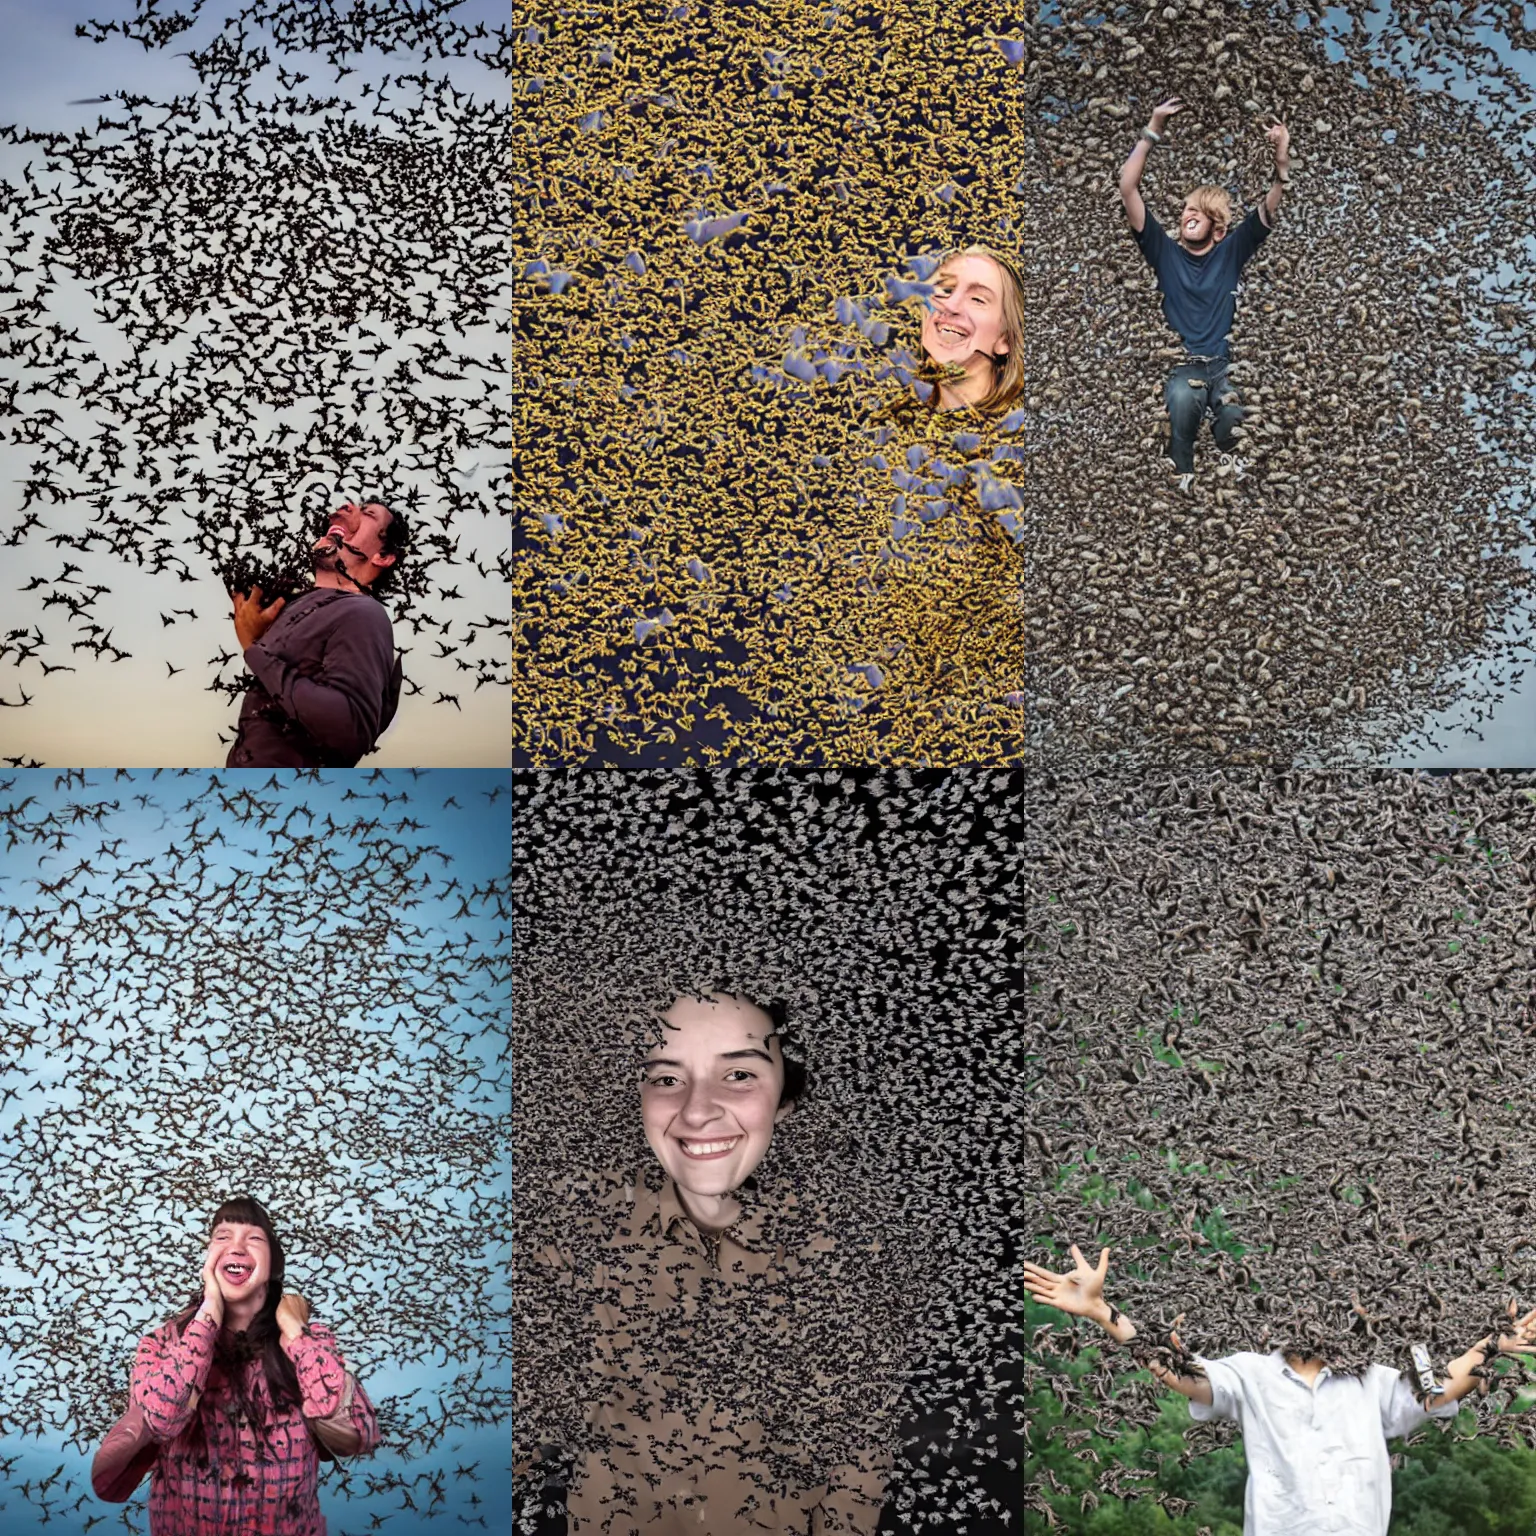 Prompt: A person happily covered in a swarm of bats | Photograph | Outdoors